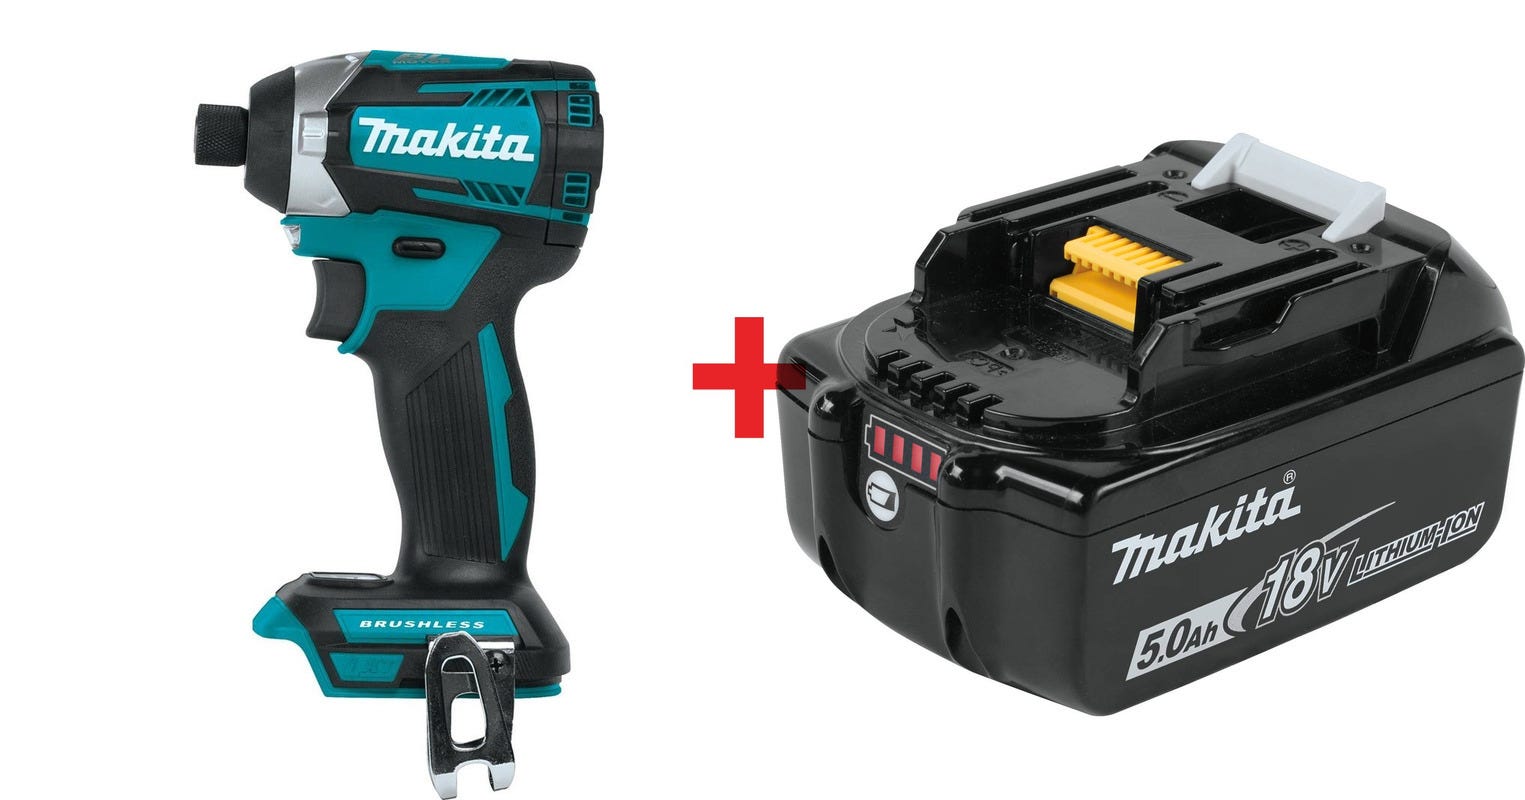 Makita 18V Brushless Cordless Quick-Shift Mode 3-Speed Impact Driver with 18V LXT 5.0Ah Battery